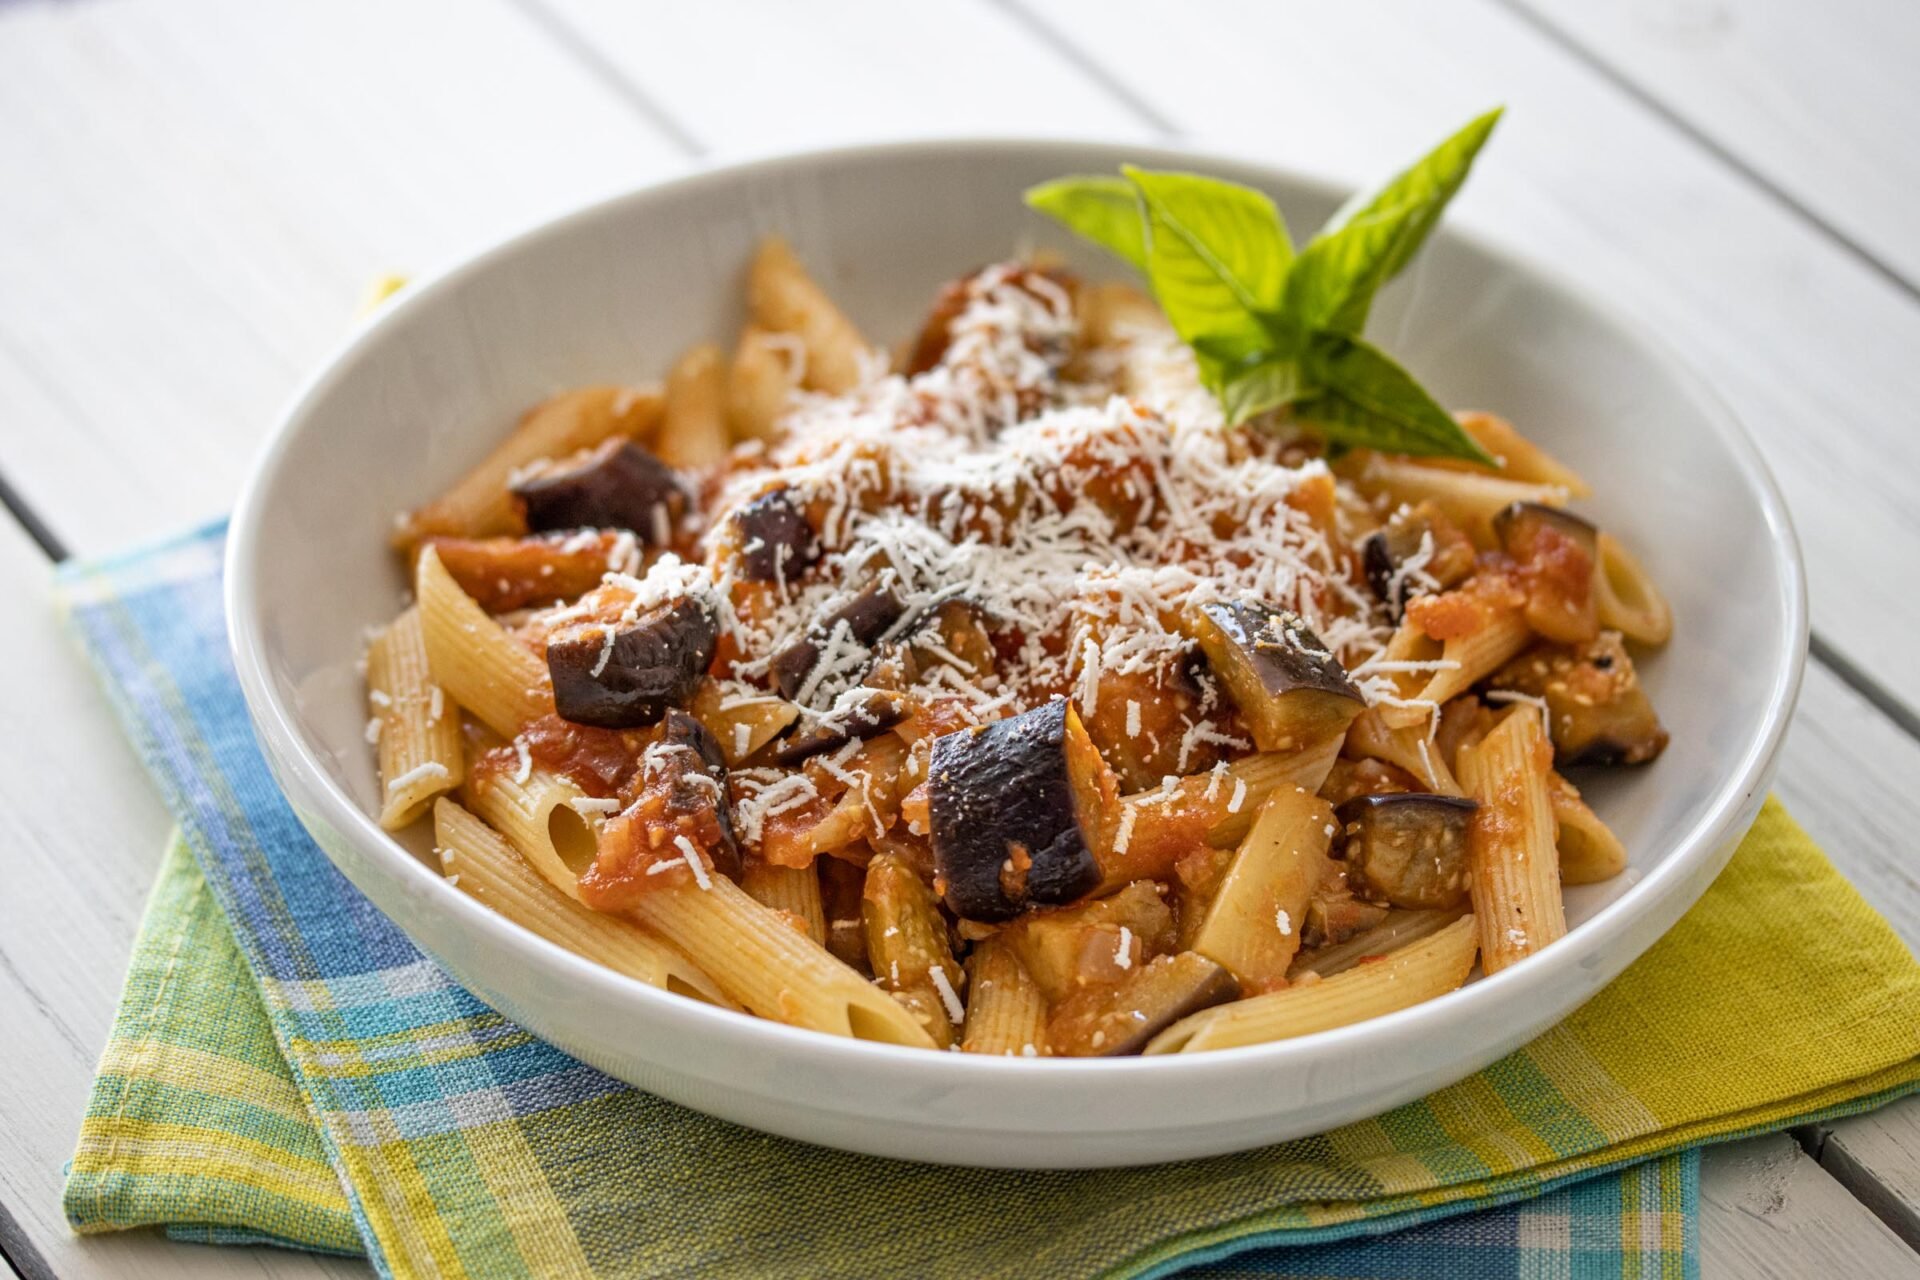 Eggplant, Pasta, and Ricotta Salata – Summer In A Plate